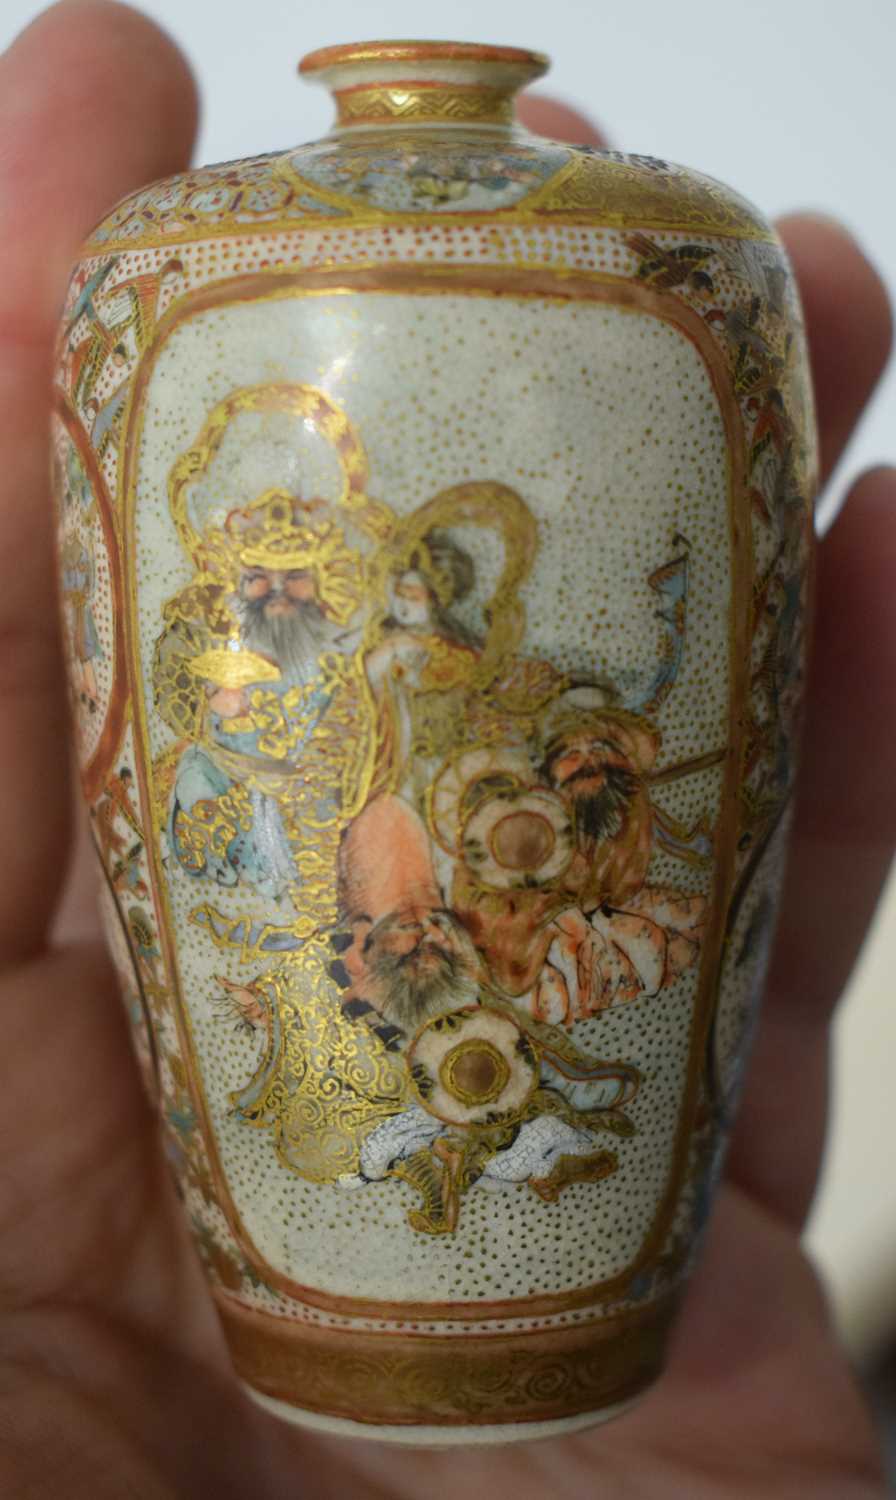 A SMALL 19TH CENTURY JAPANESE MEIJI PERIOD SATSUMA POTTERY VASE painted with figures and birds - Image 9 of 14